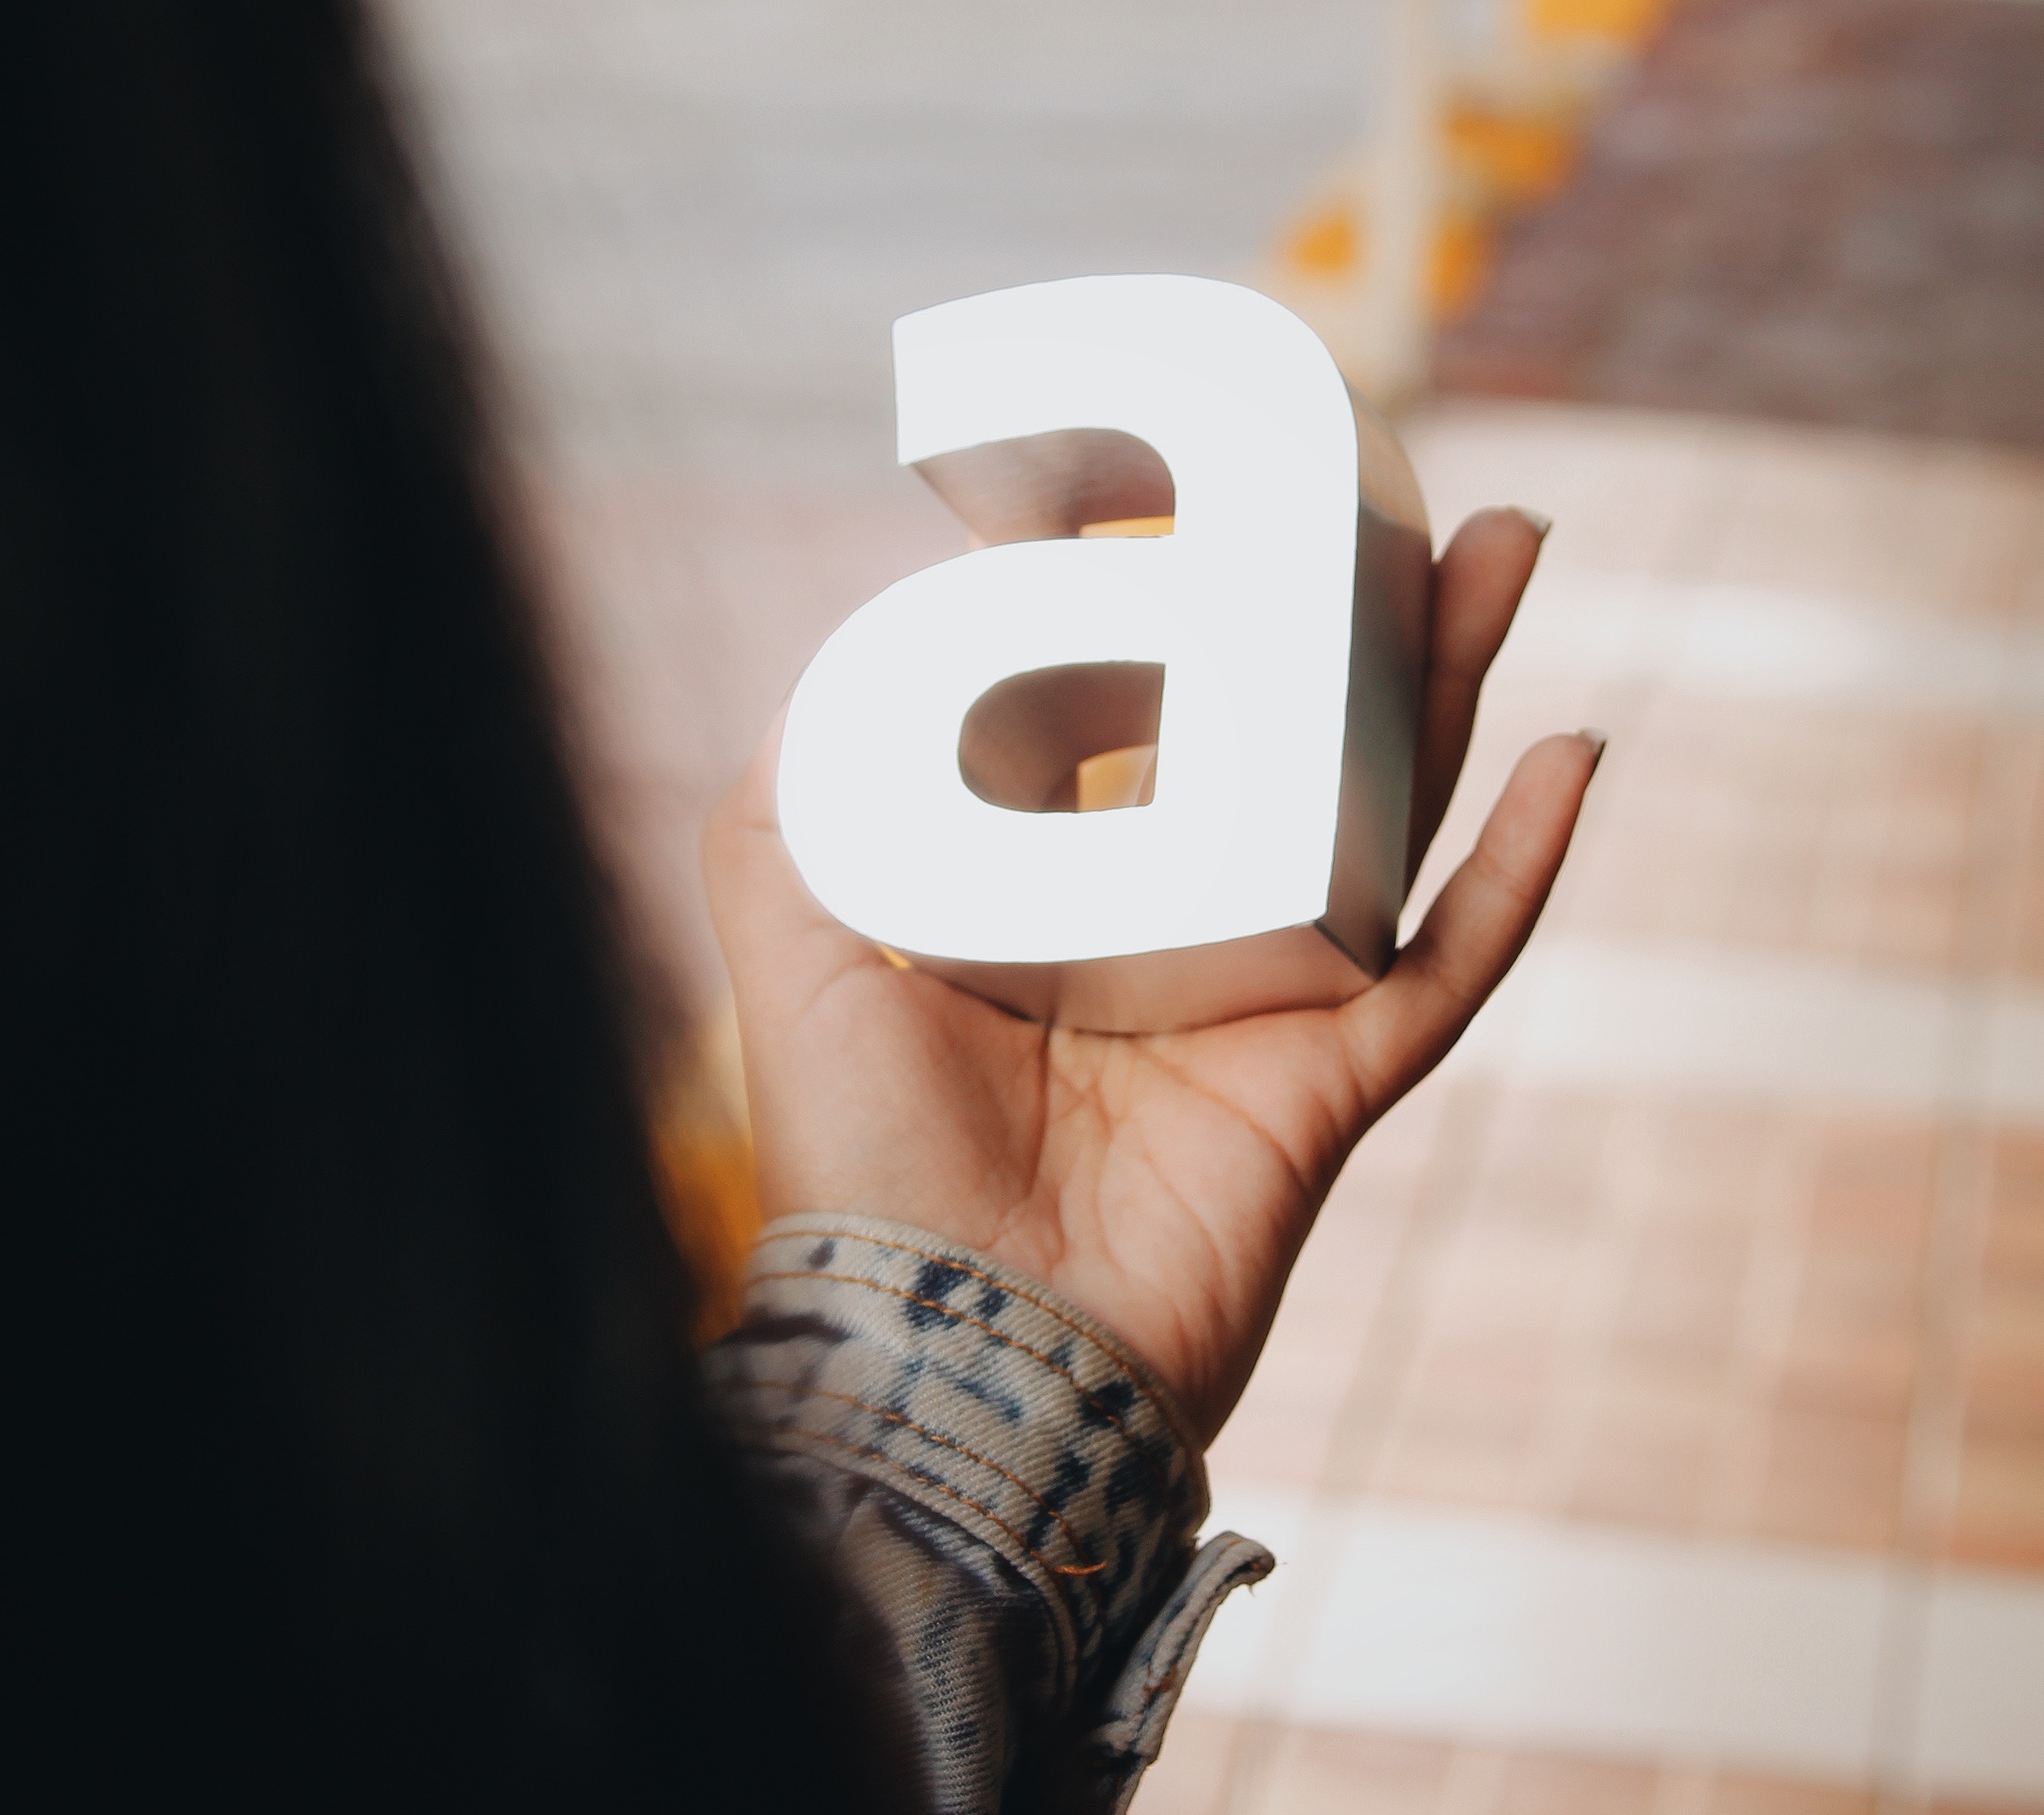 Person holding an "A" letter in their hand